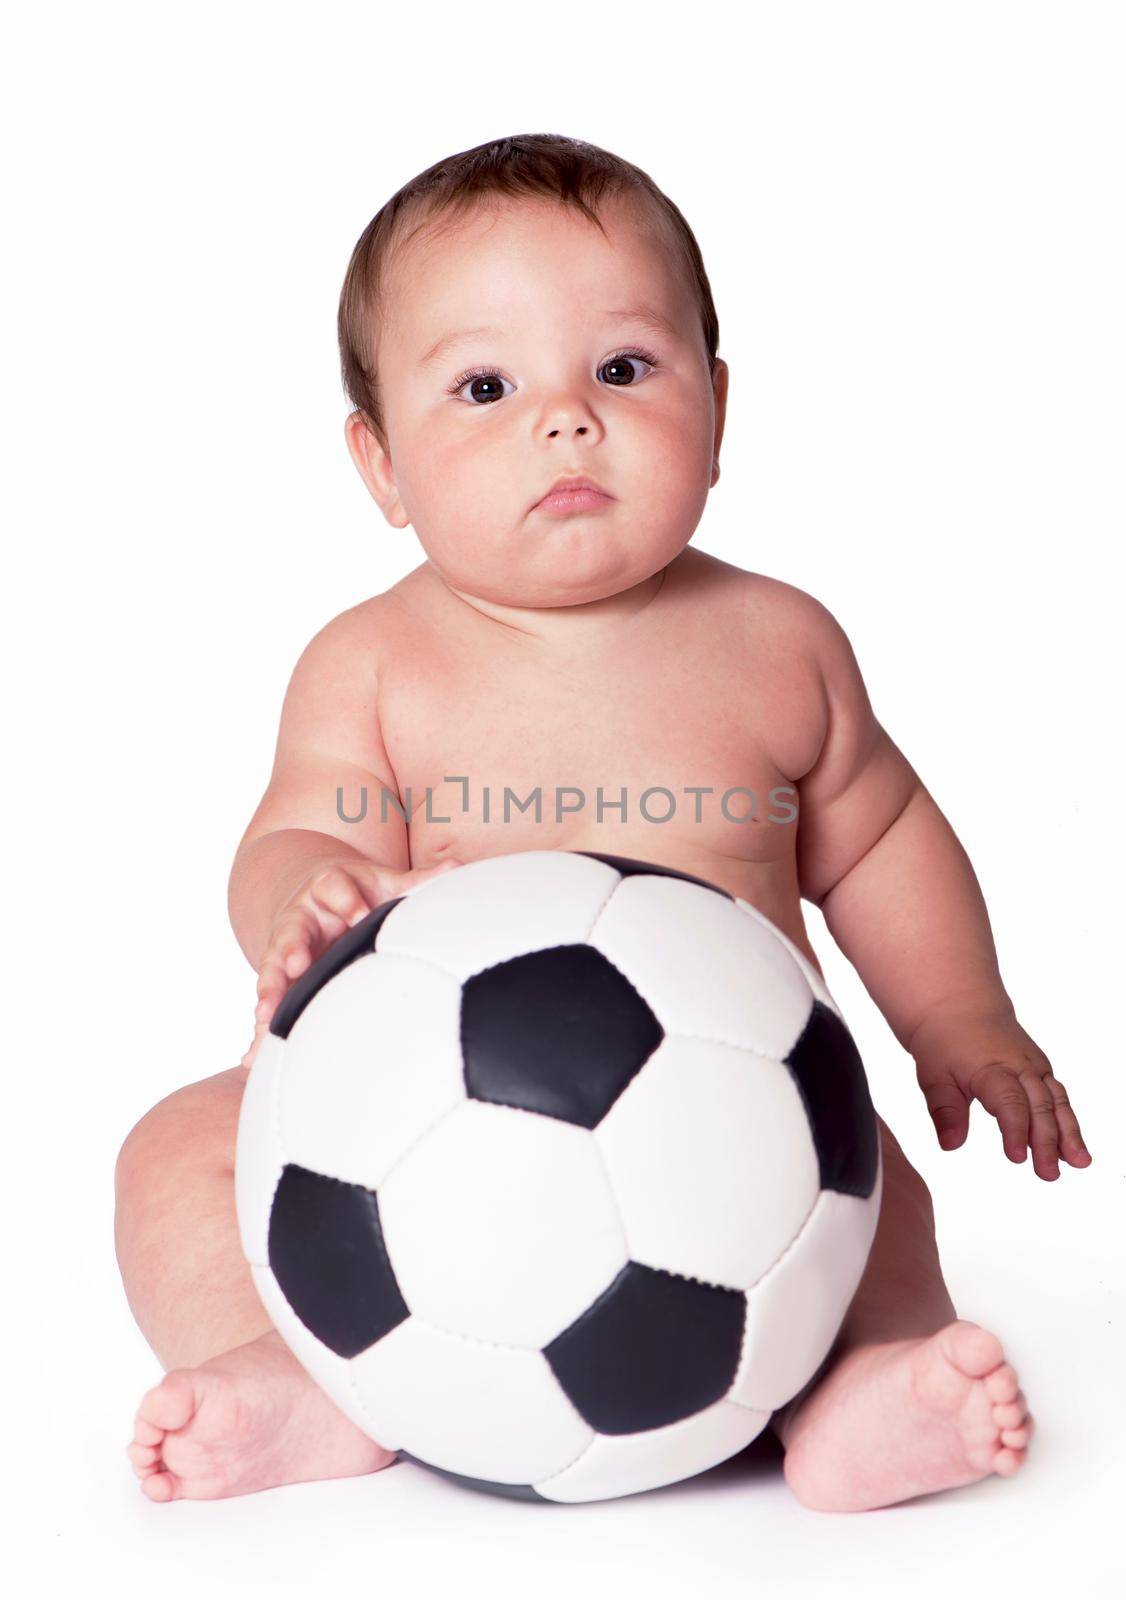 Baby playing with soccer ball. All on white background